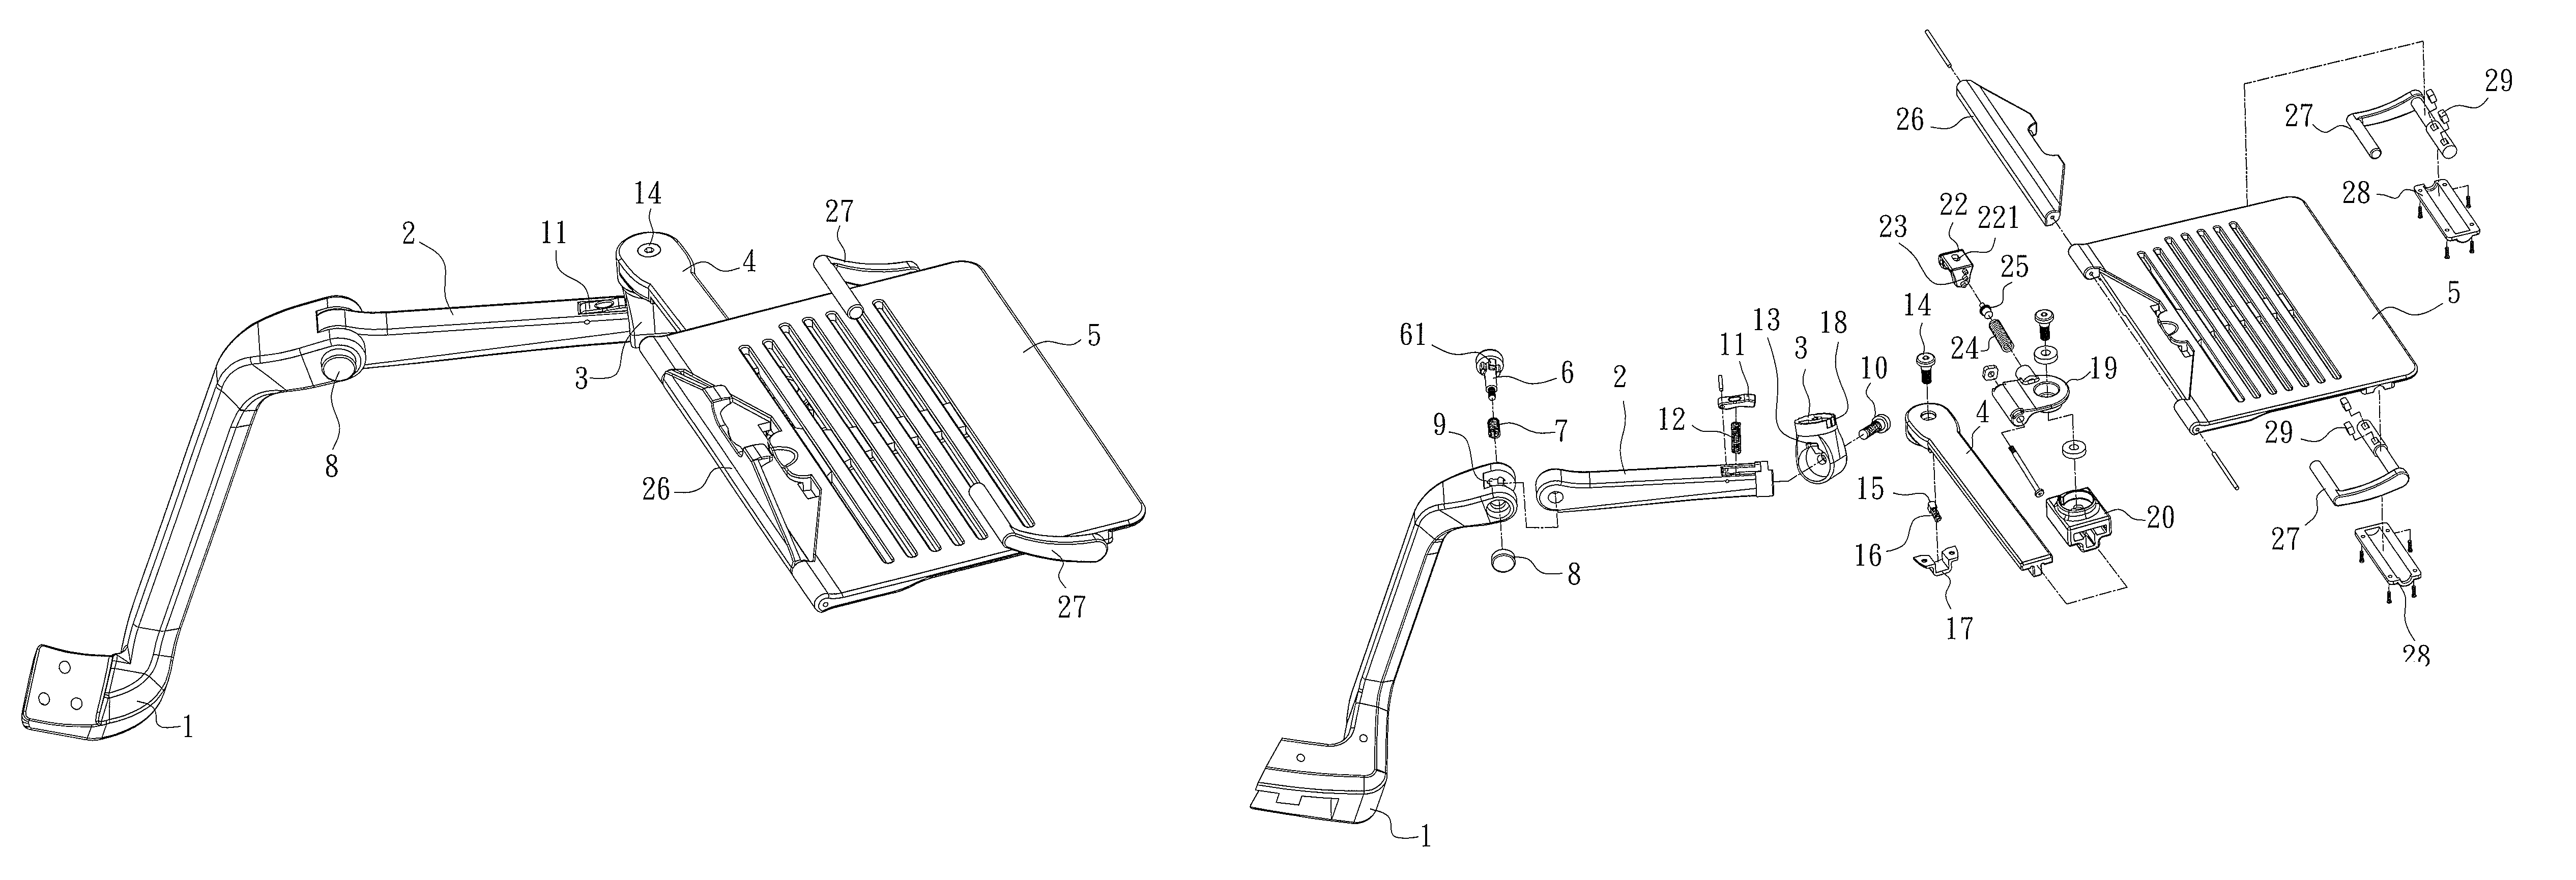 Foldable bracket of a chair